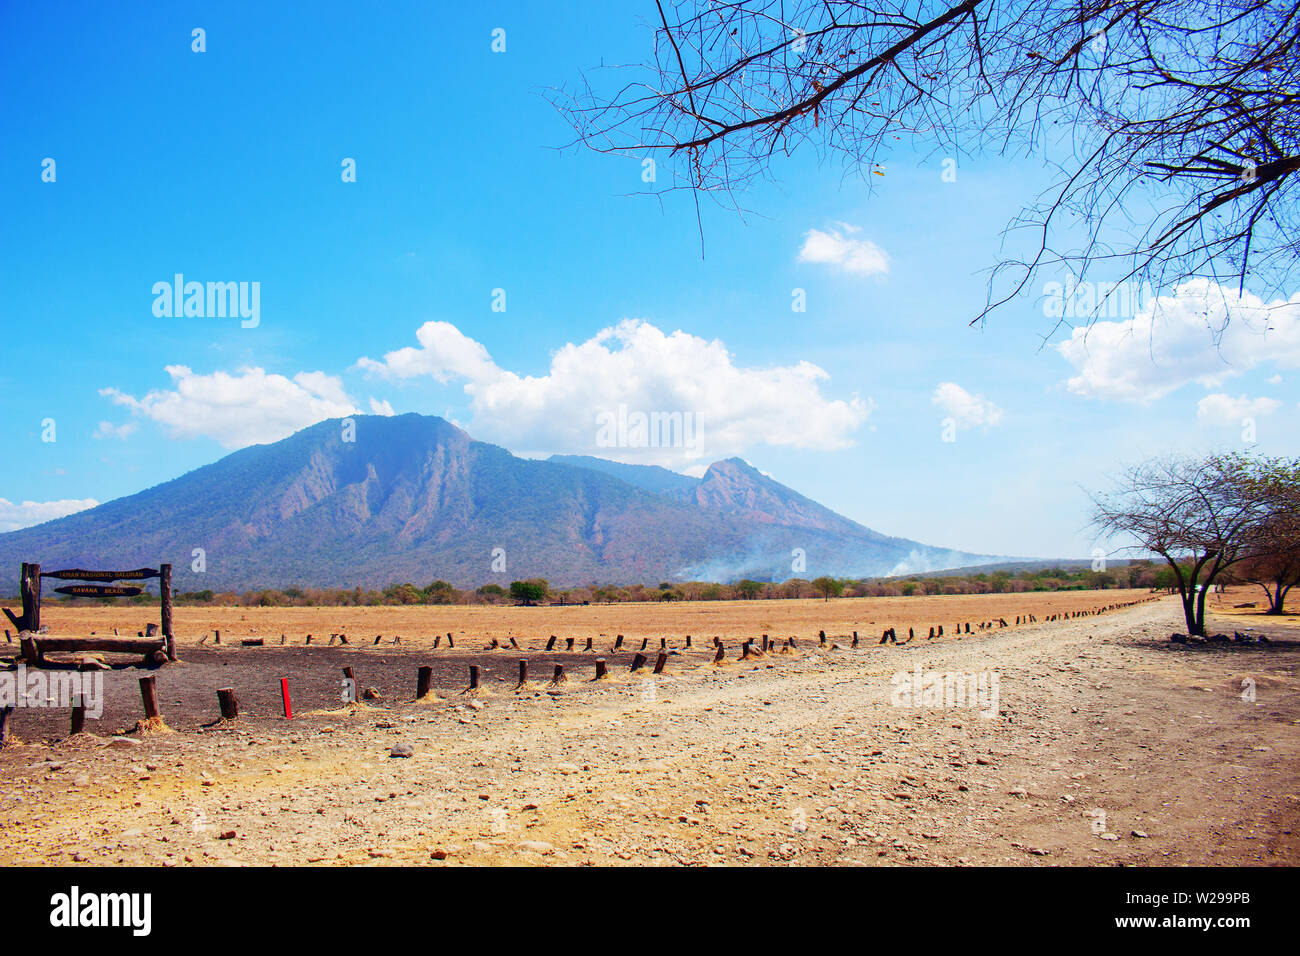 Landscape of Mountain, Blue Sky,Dry Grass and Dry Branch Stock Photo